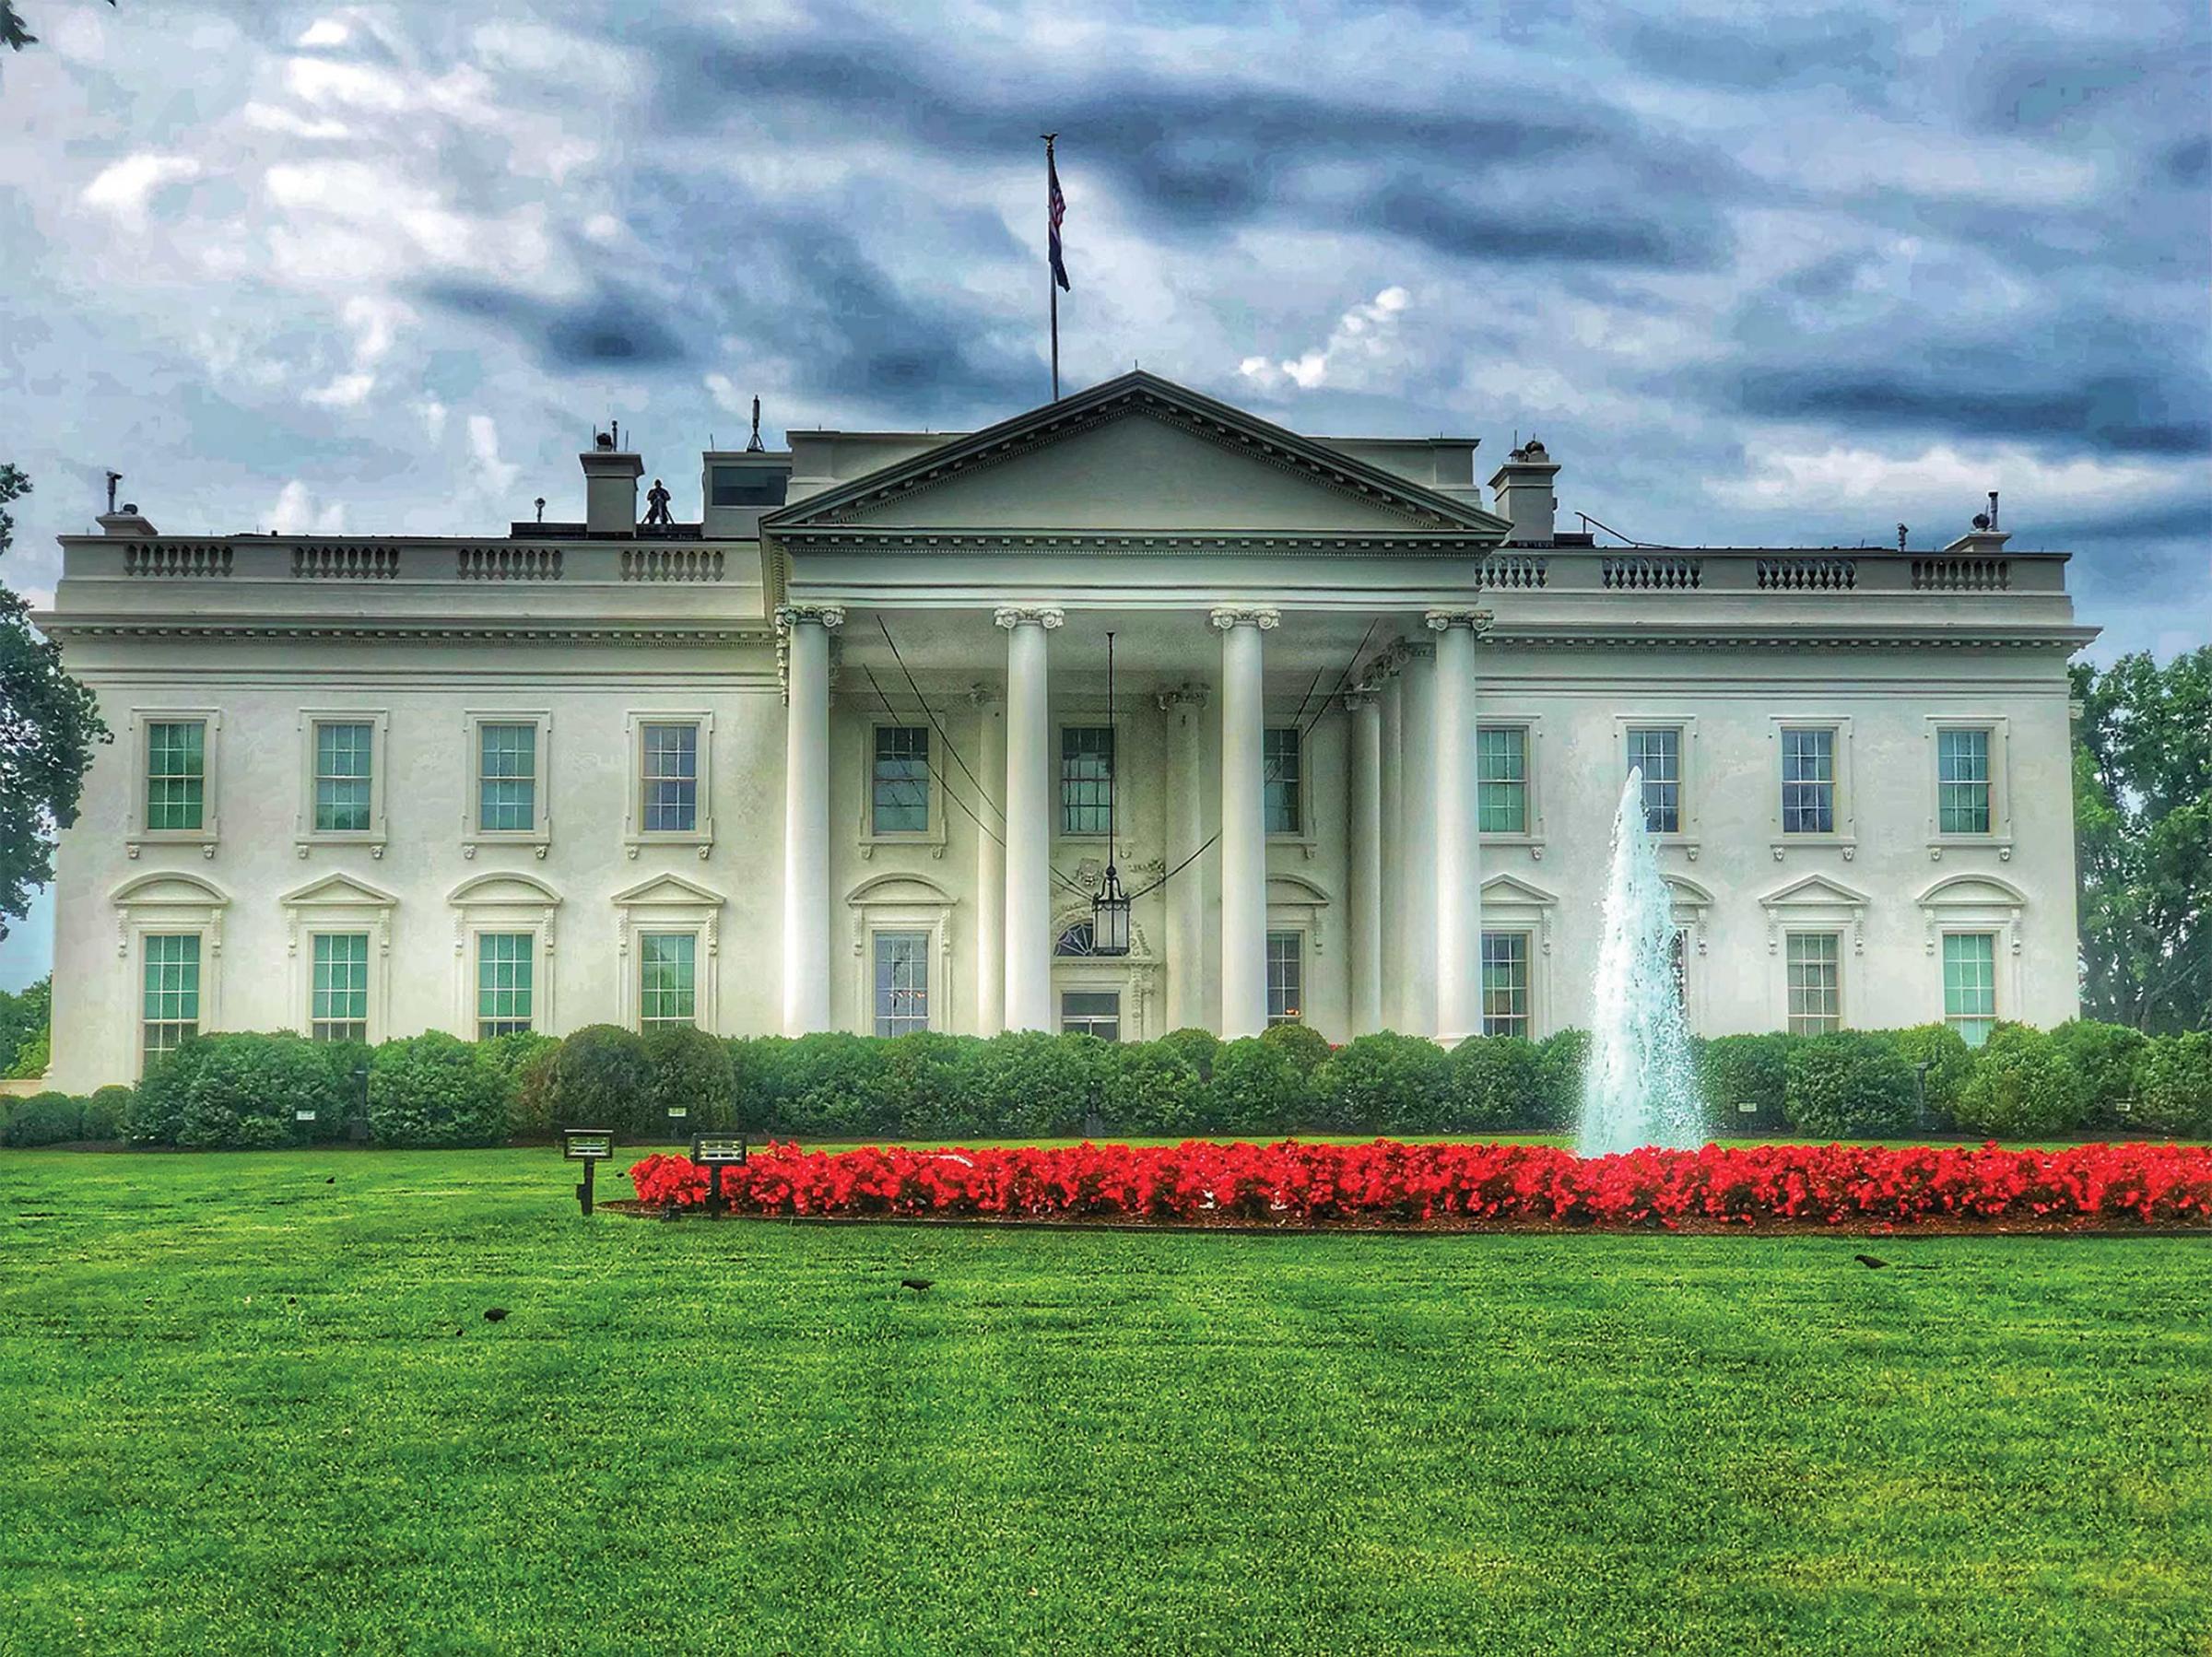 The White House in spring under cloudy skies with red flowers and a fountain